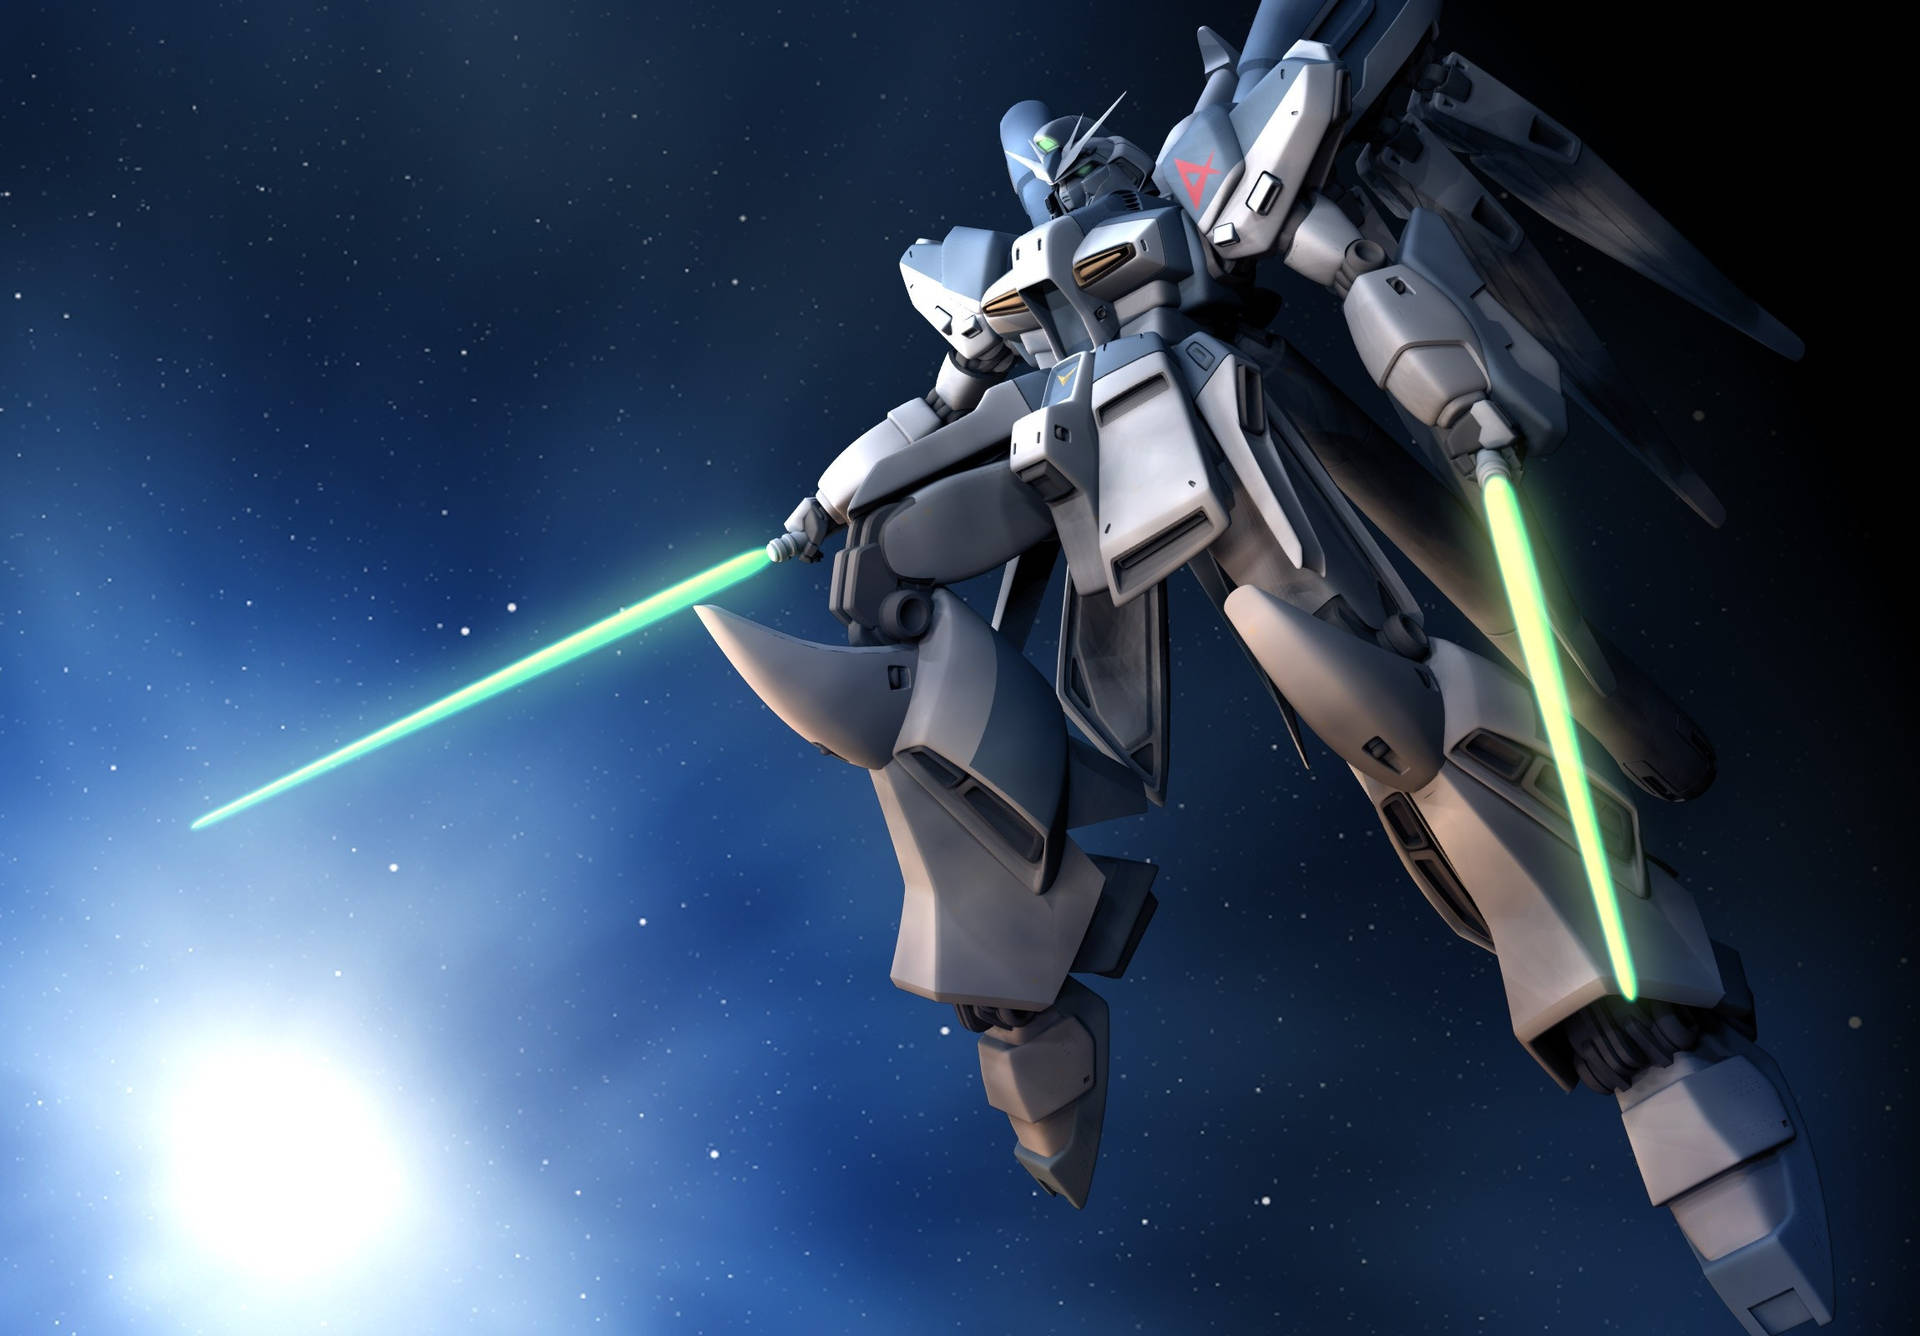 Intense Battle Scene With White And Green Mobile Suit Gundam